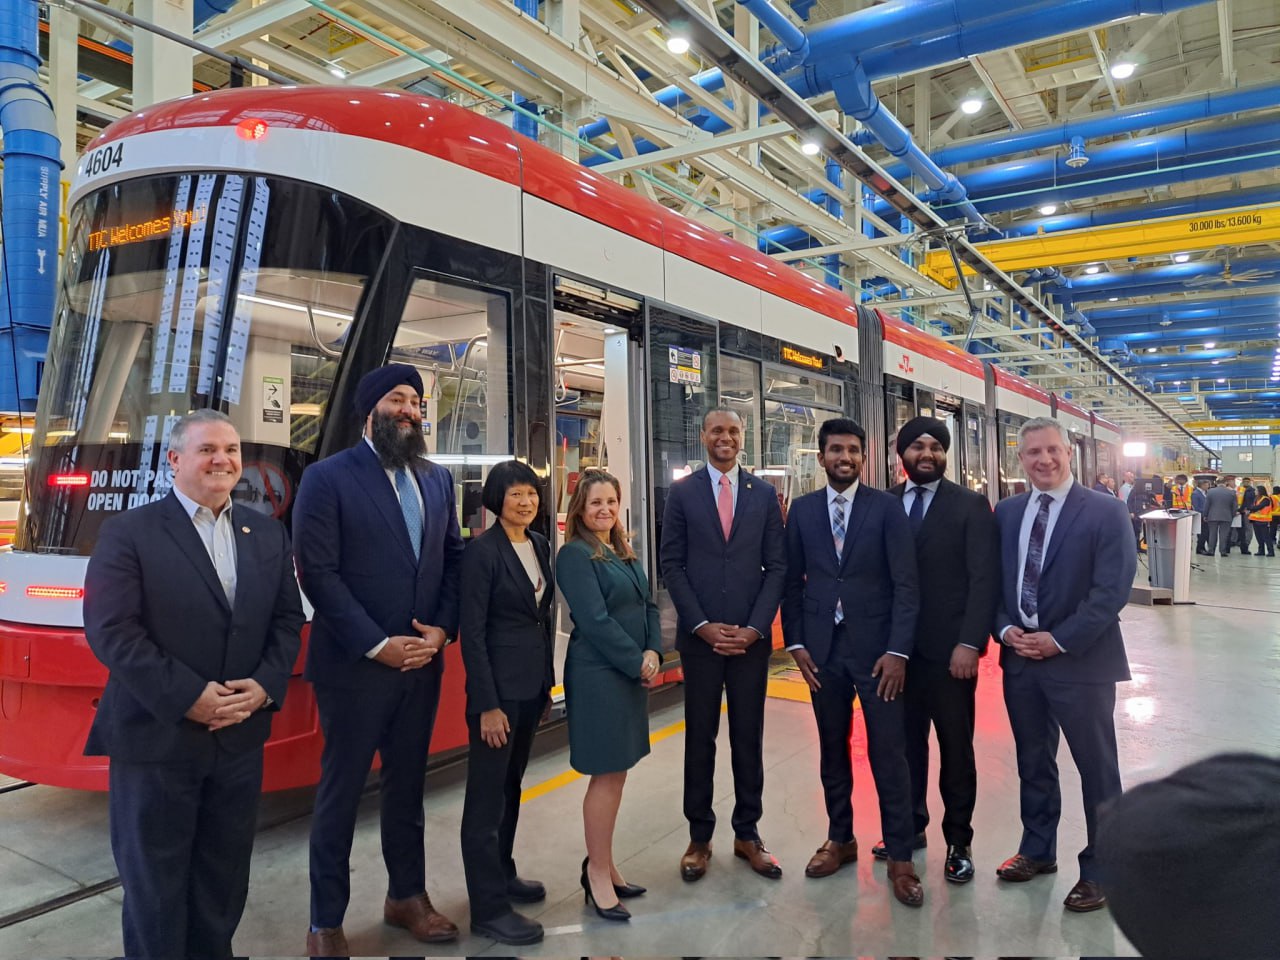 Commissioning ceremony of the Flexity tram by Alstom in Toronto